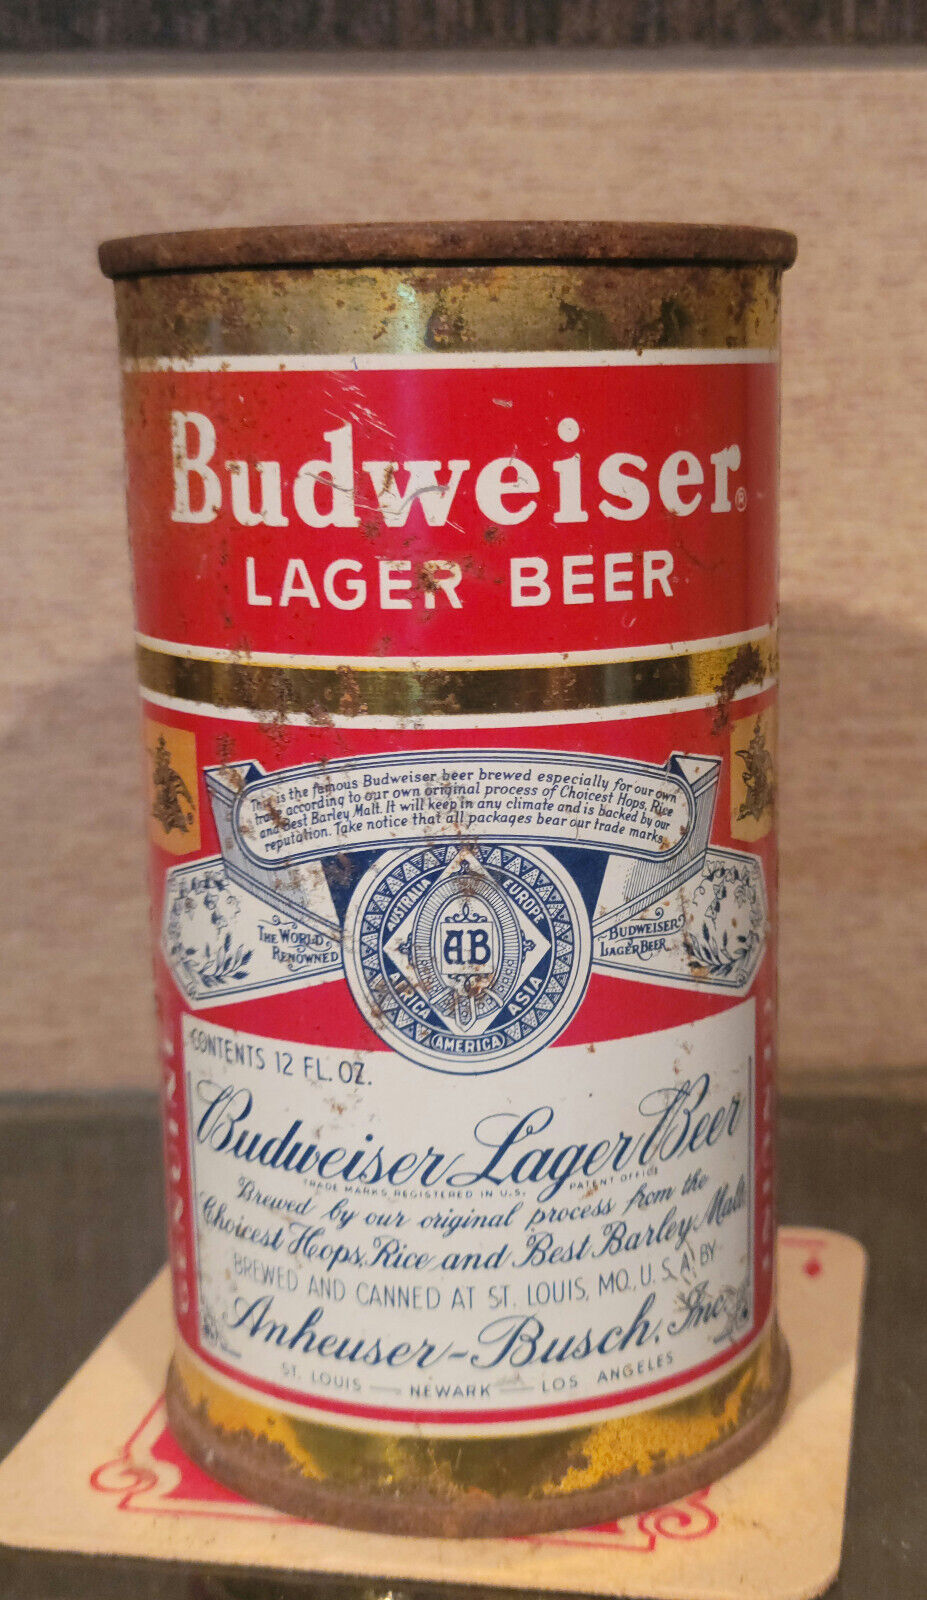 1955 2-SIDED BUDWEISER STEEL FLAT TOP BEER CAN 3 CITY ST LOUIS MISSOURI